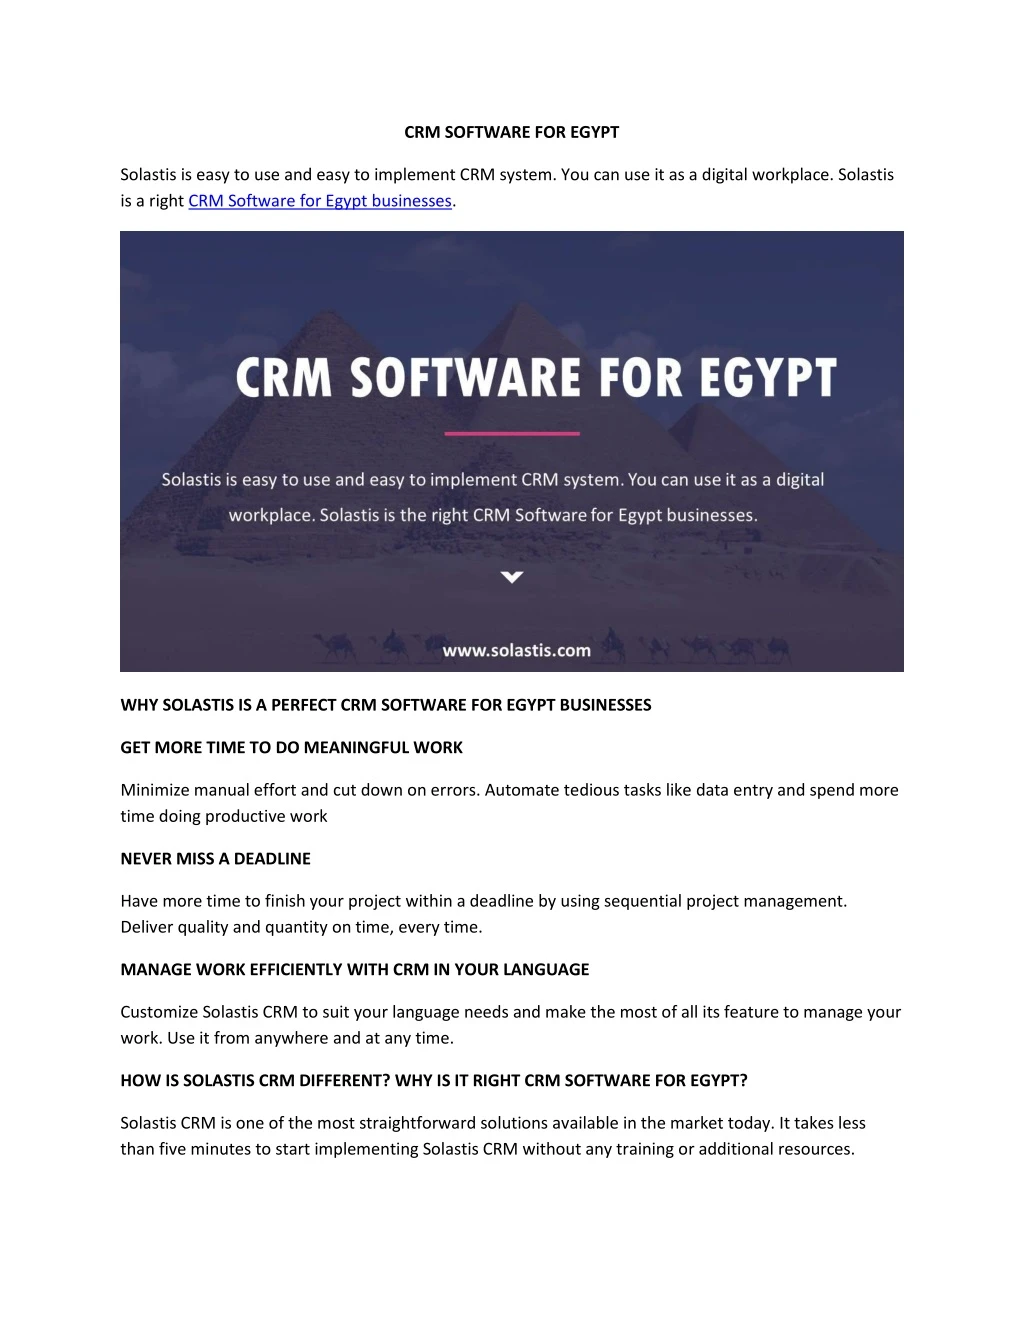 crm software for egypt